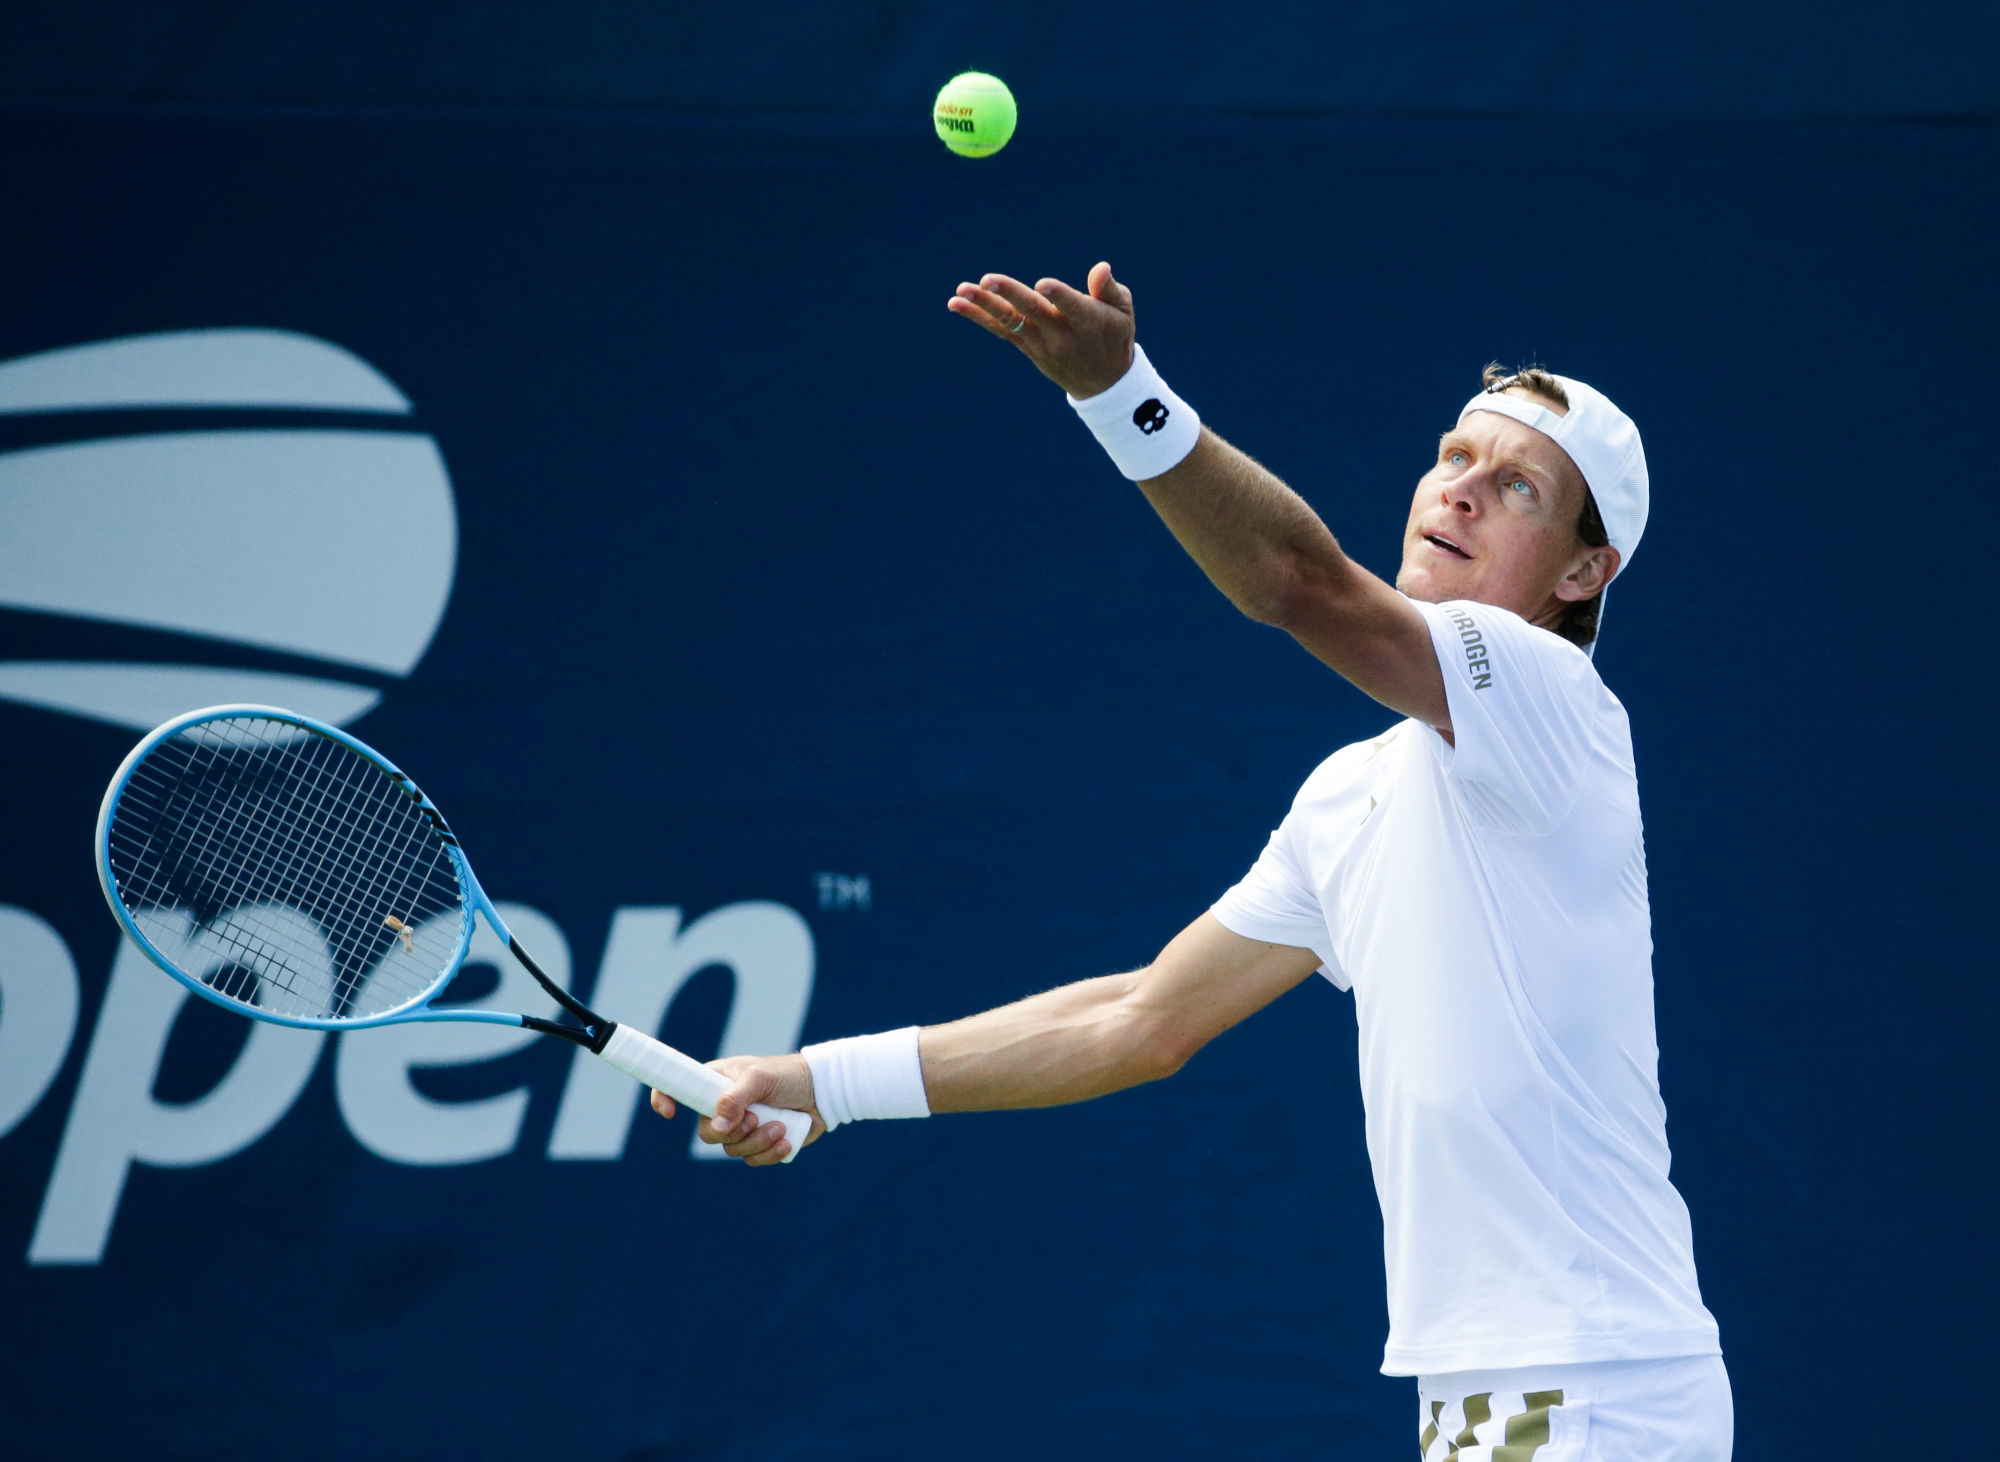 Aug 26, 2019; Flushing, NY, USA; Tomas Berdych of Czech Republic serves in a first round match on day one of the 2019 U.S. Open tennis tournament at USTA Billie Jean King National Tennis Center. Photo : SUSA / Icon Sport